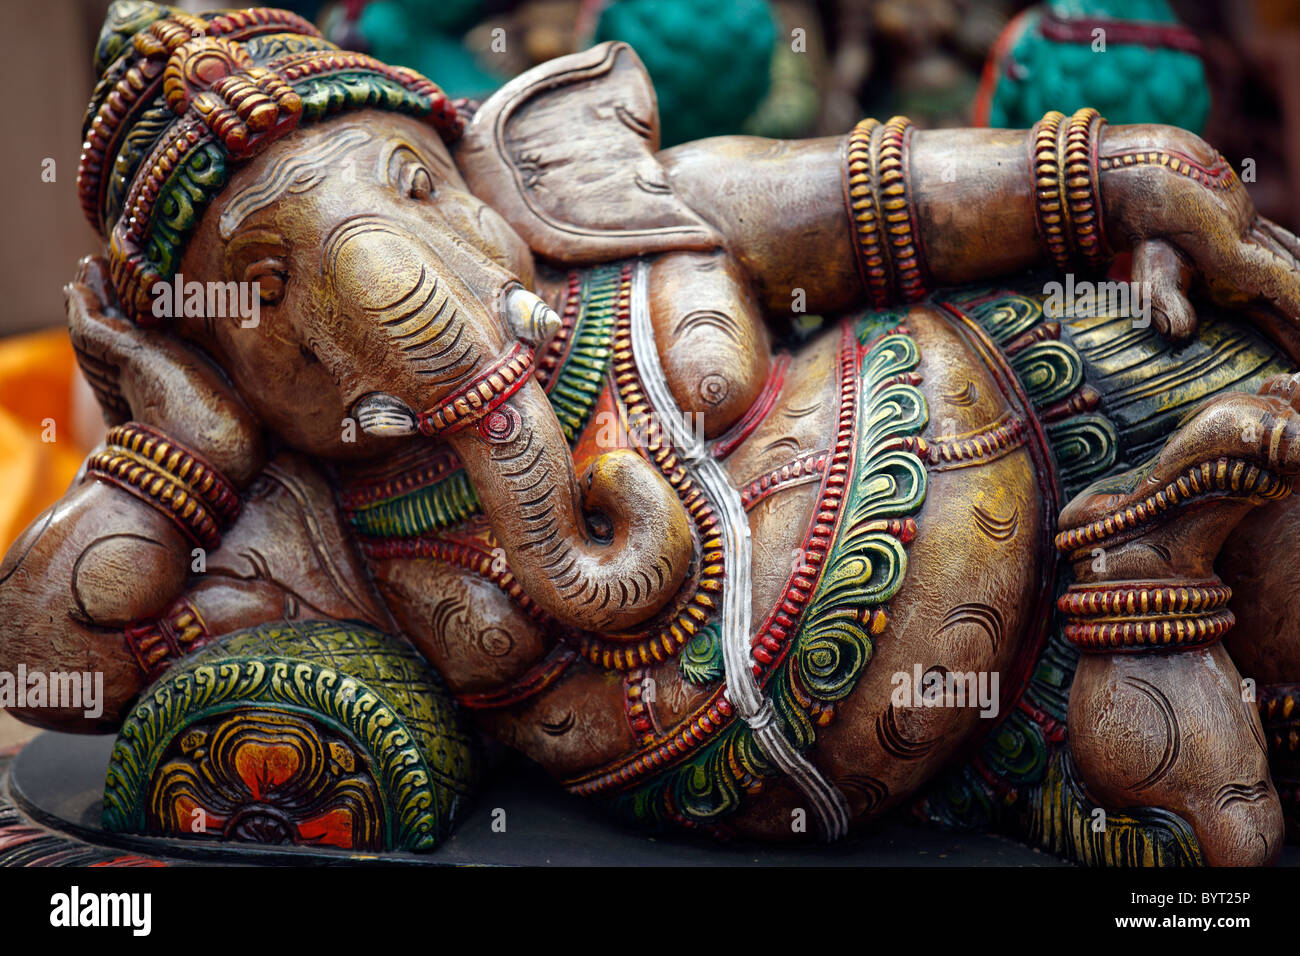 Collection of Amazing Indian God Images in Full 4K Resolution with over ...